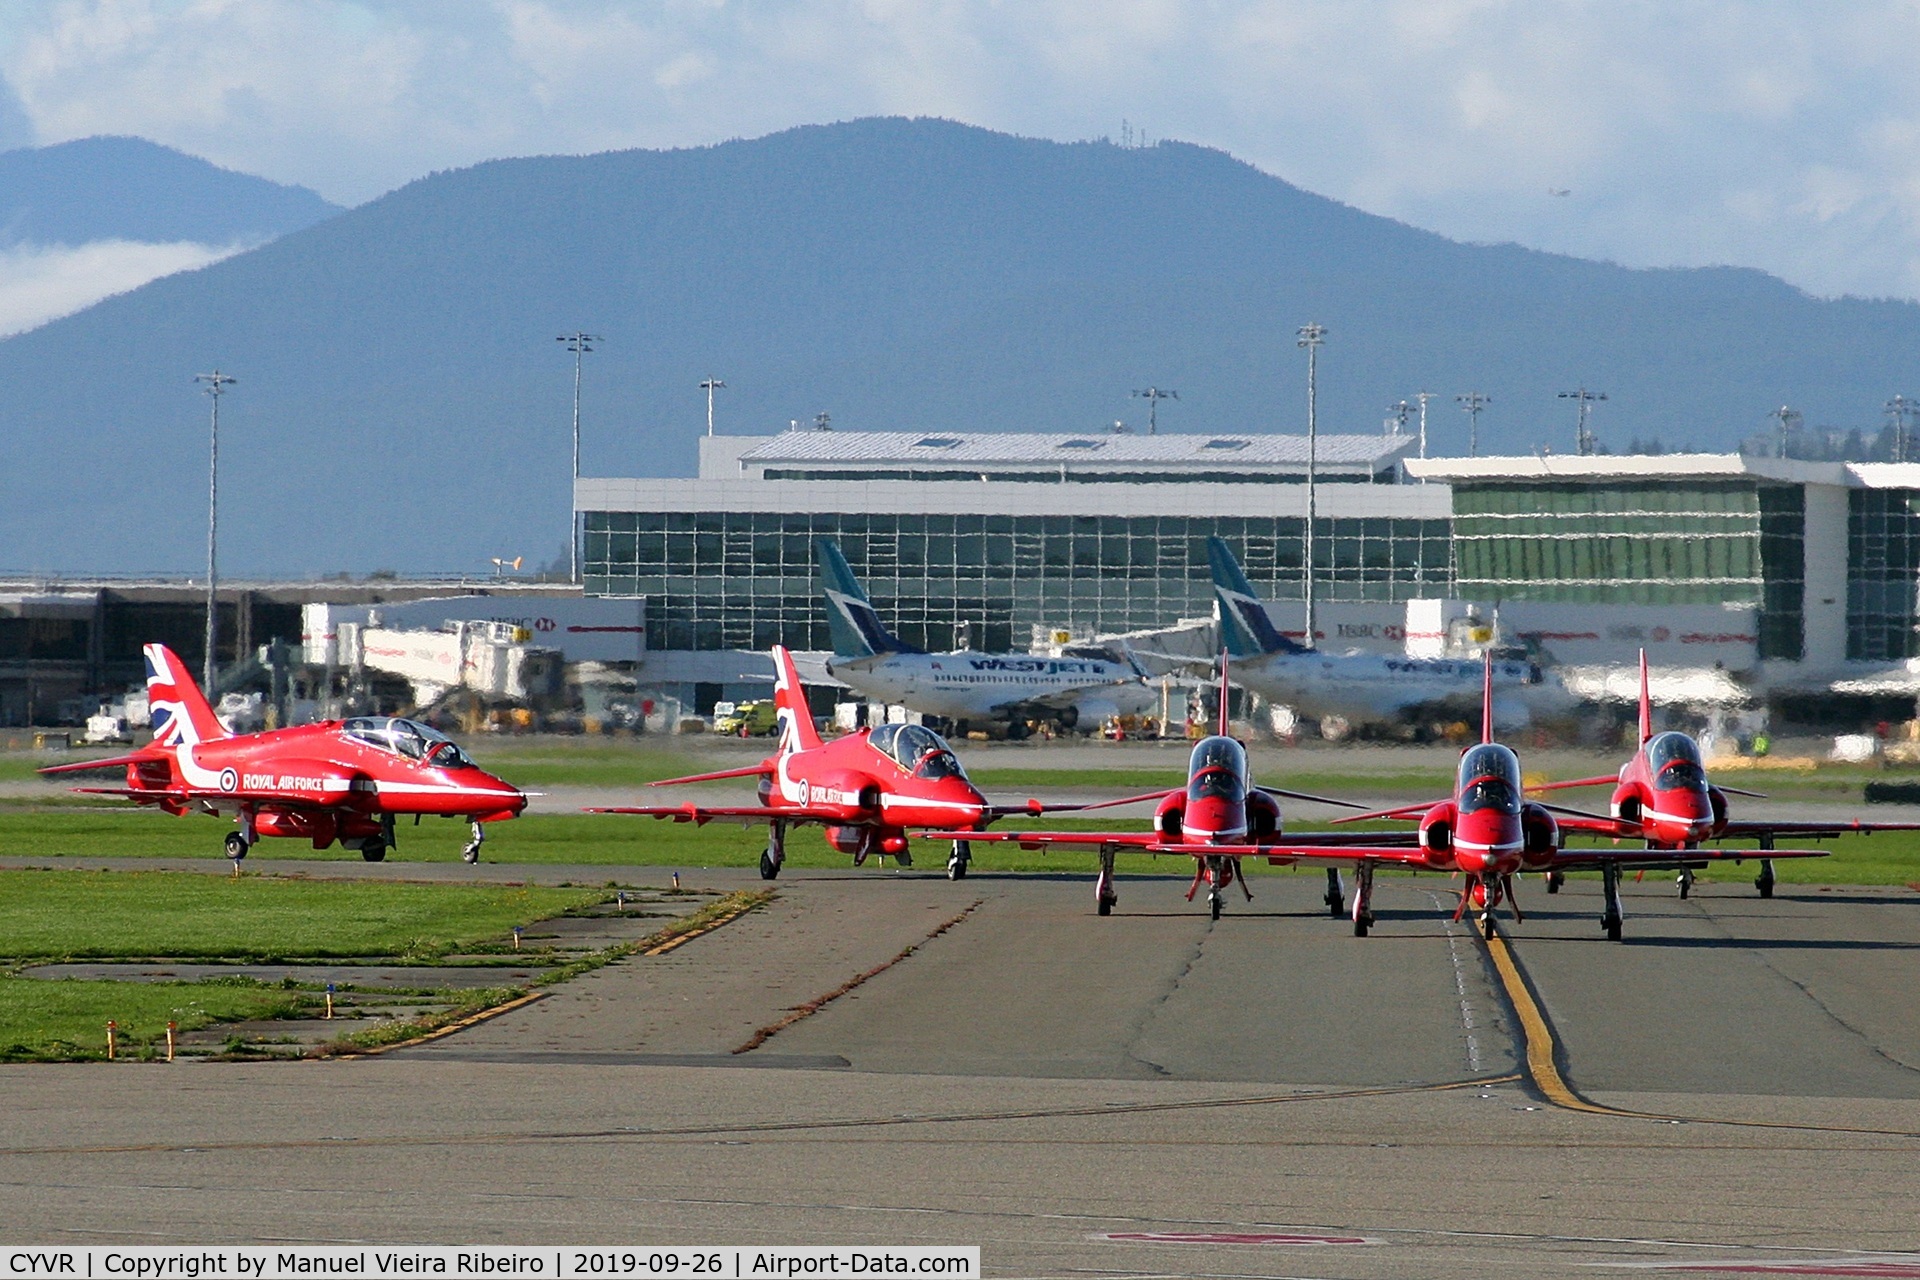 Vancouver International Airport, Vancouver, British Columbia Canada (CYVR) - Red Arrows 2019 North American tour